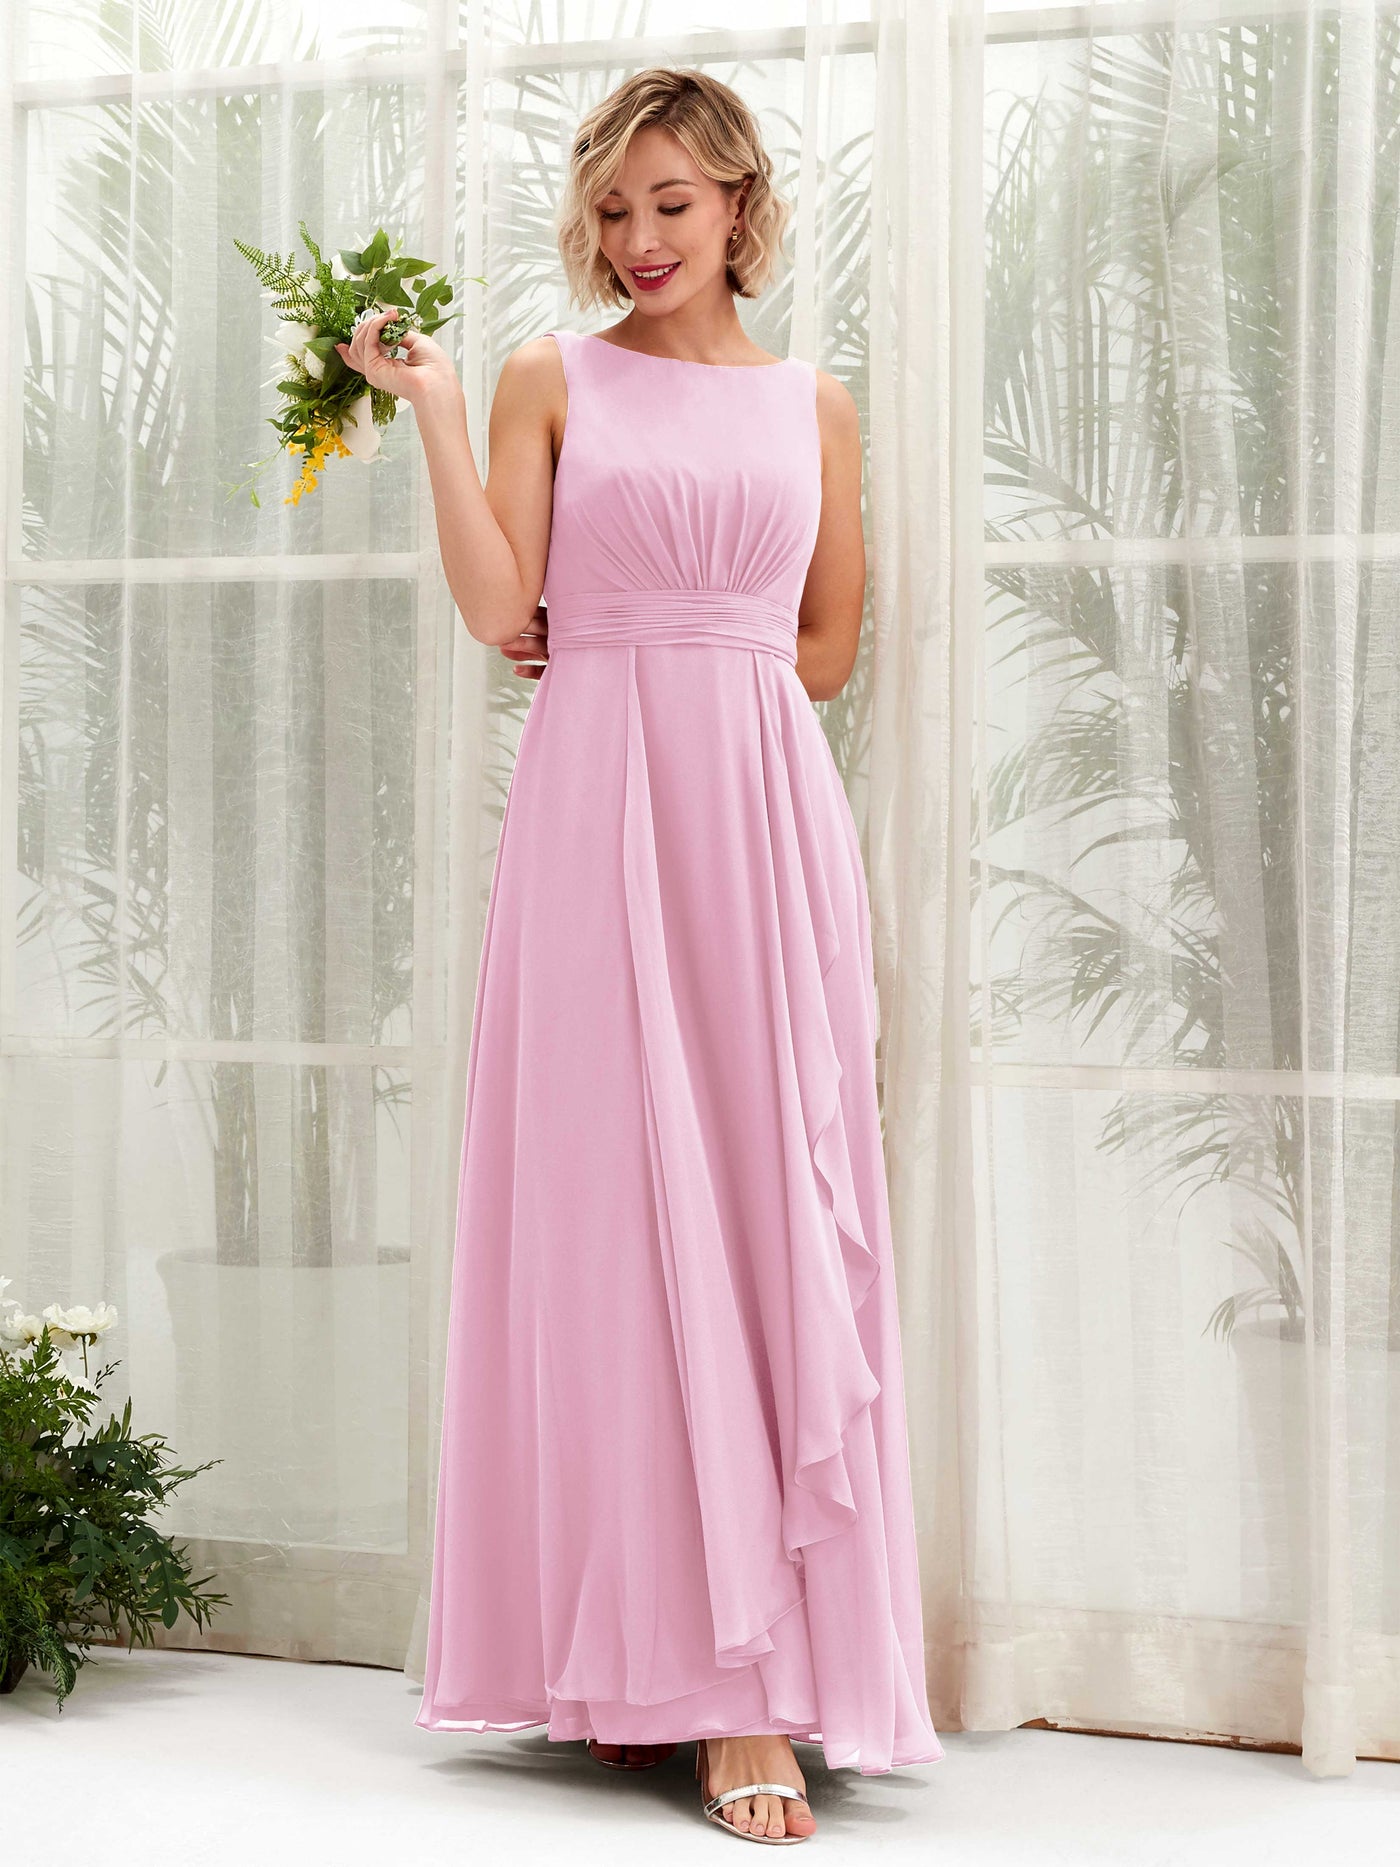 Candy Pink Bridesmaid Dresses Bridesmaid Dress A-line Chiffon Bateau Full Length Sleeveless Wedding Party Dress (81225839)#color_candy-pink